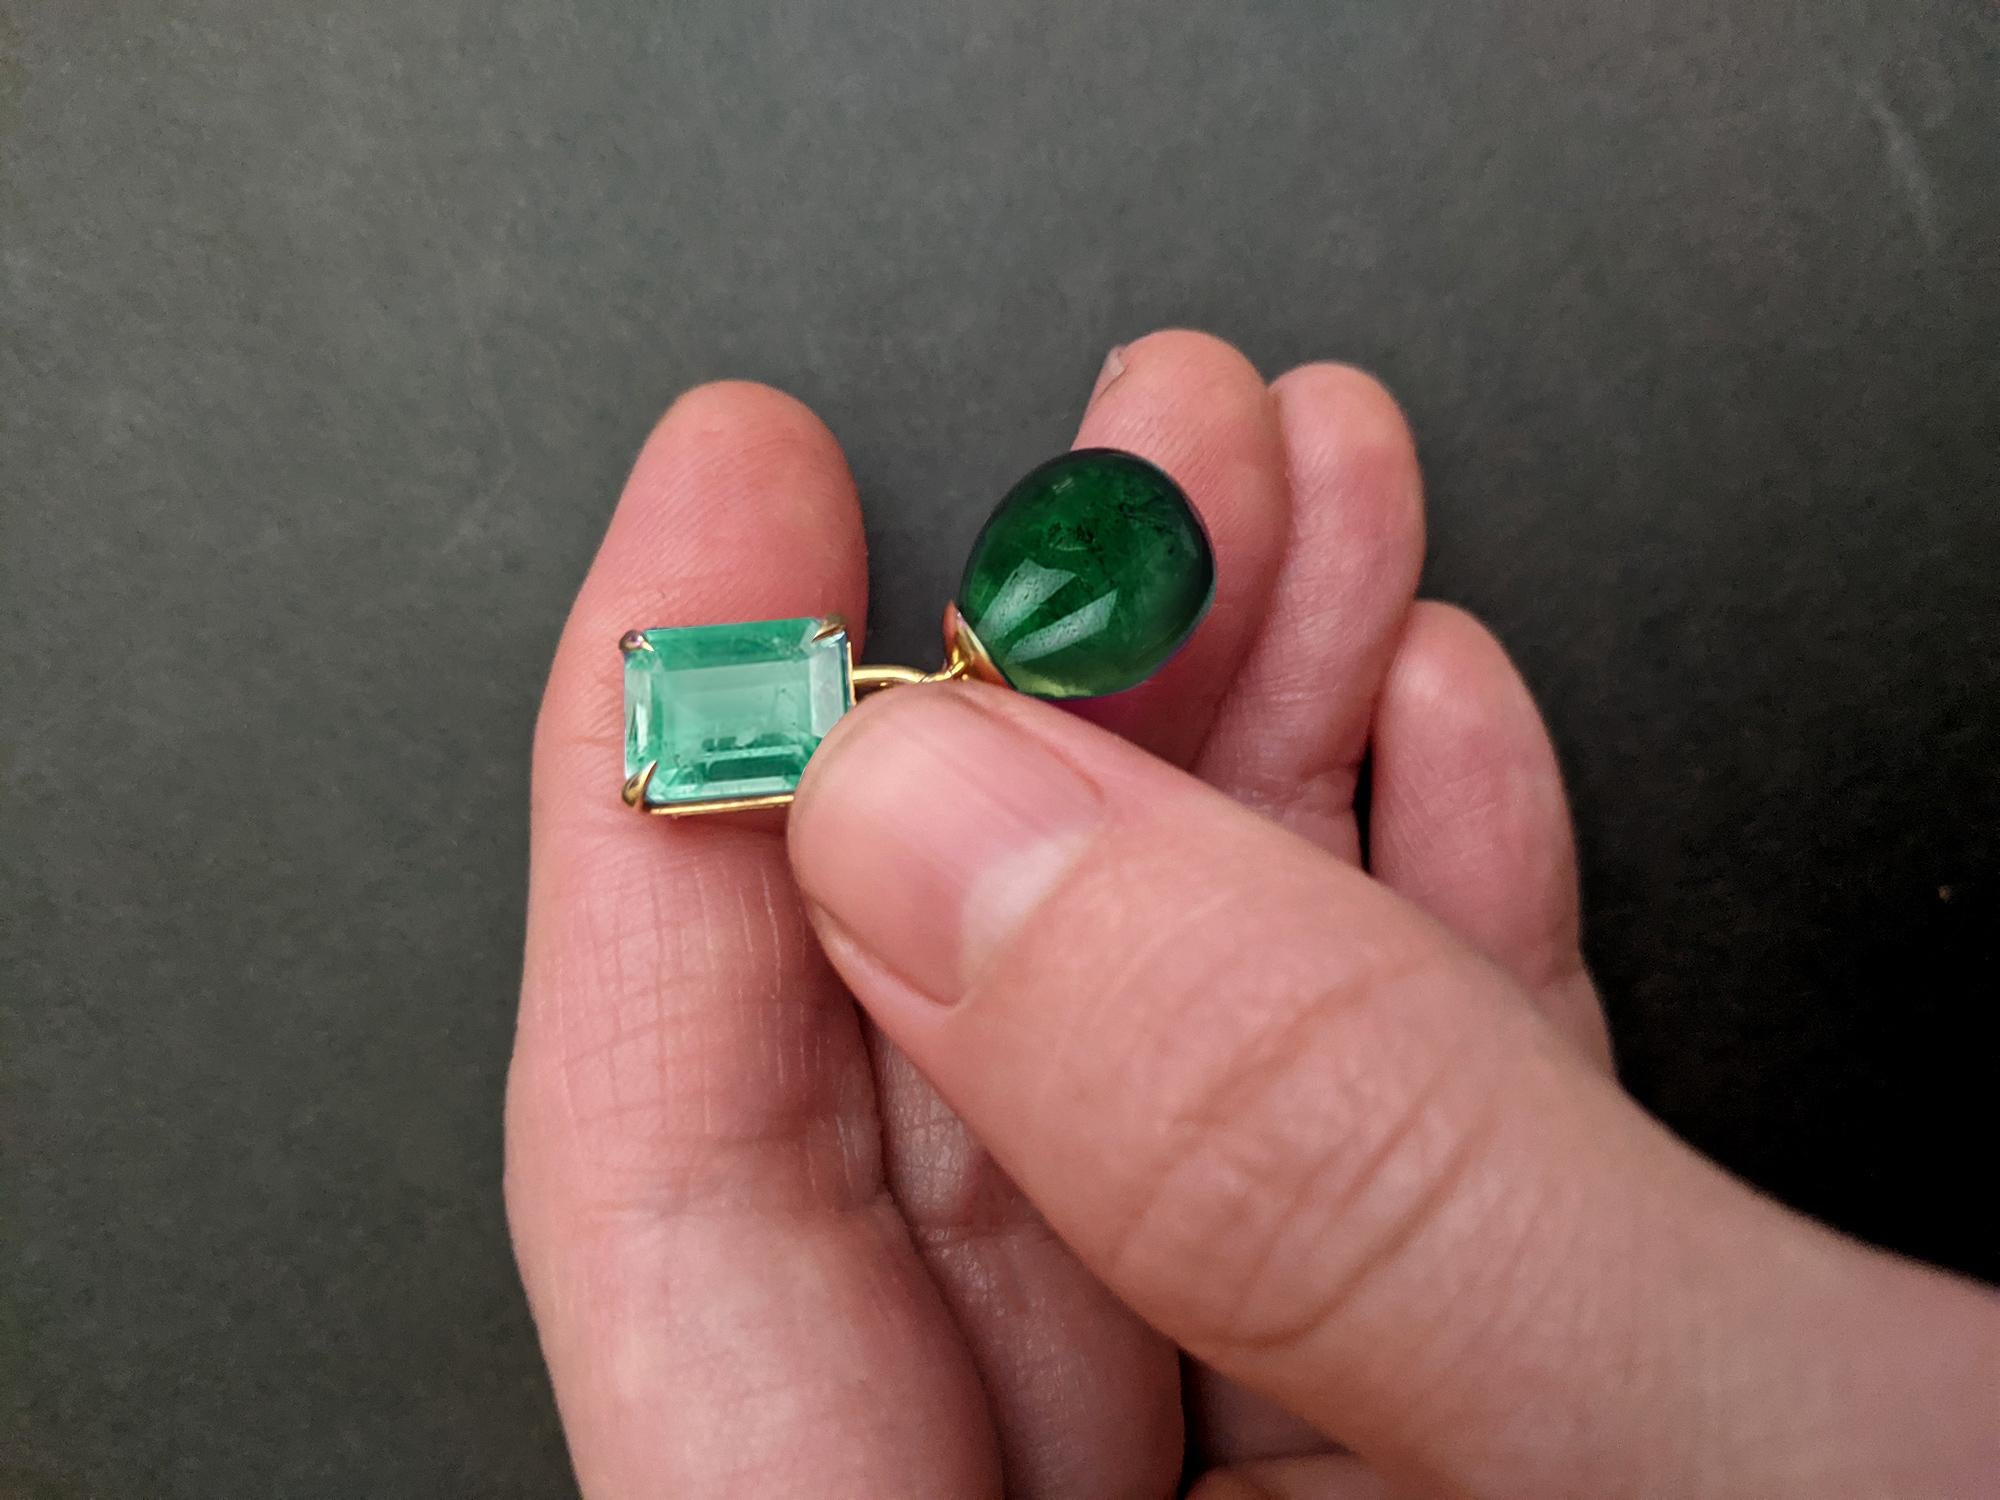 These contemporary stud earrings are crafted from 18 karat rose gold, featuring natural emeralds in an octagon cut. Each emerald measures 0.27x0.21 inches (7x5.5 mm), each emerald drop measuring 0.37x0.27 inches (9.5x7x6 mm), totaling 8.9 carats in